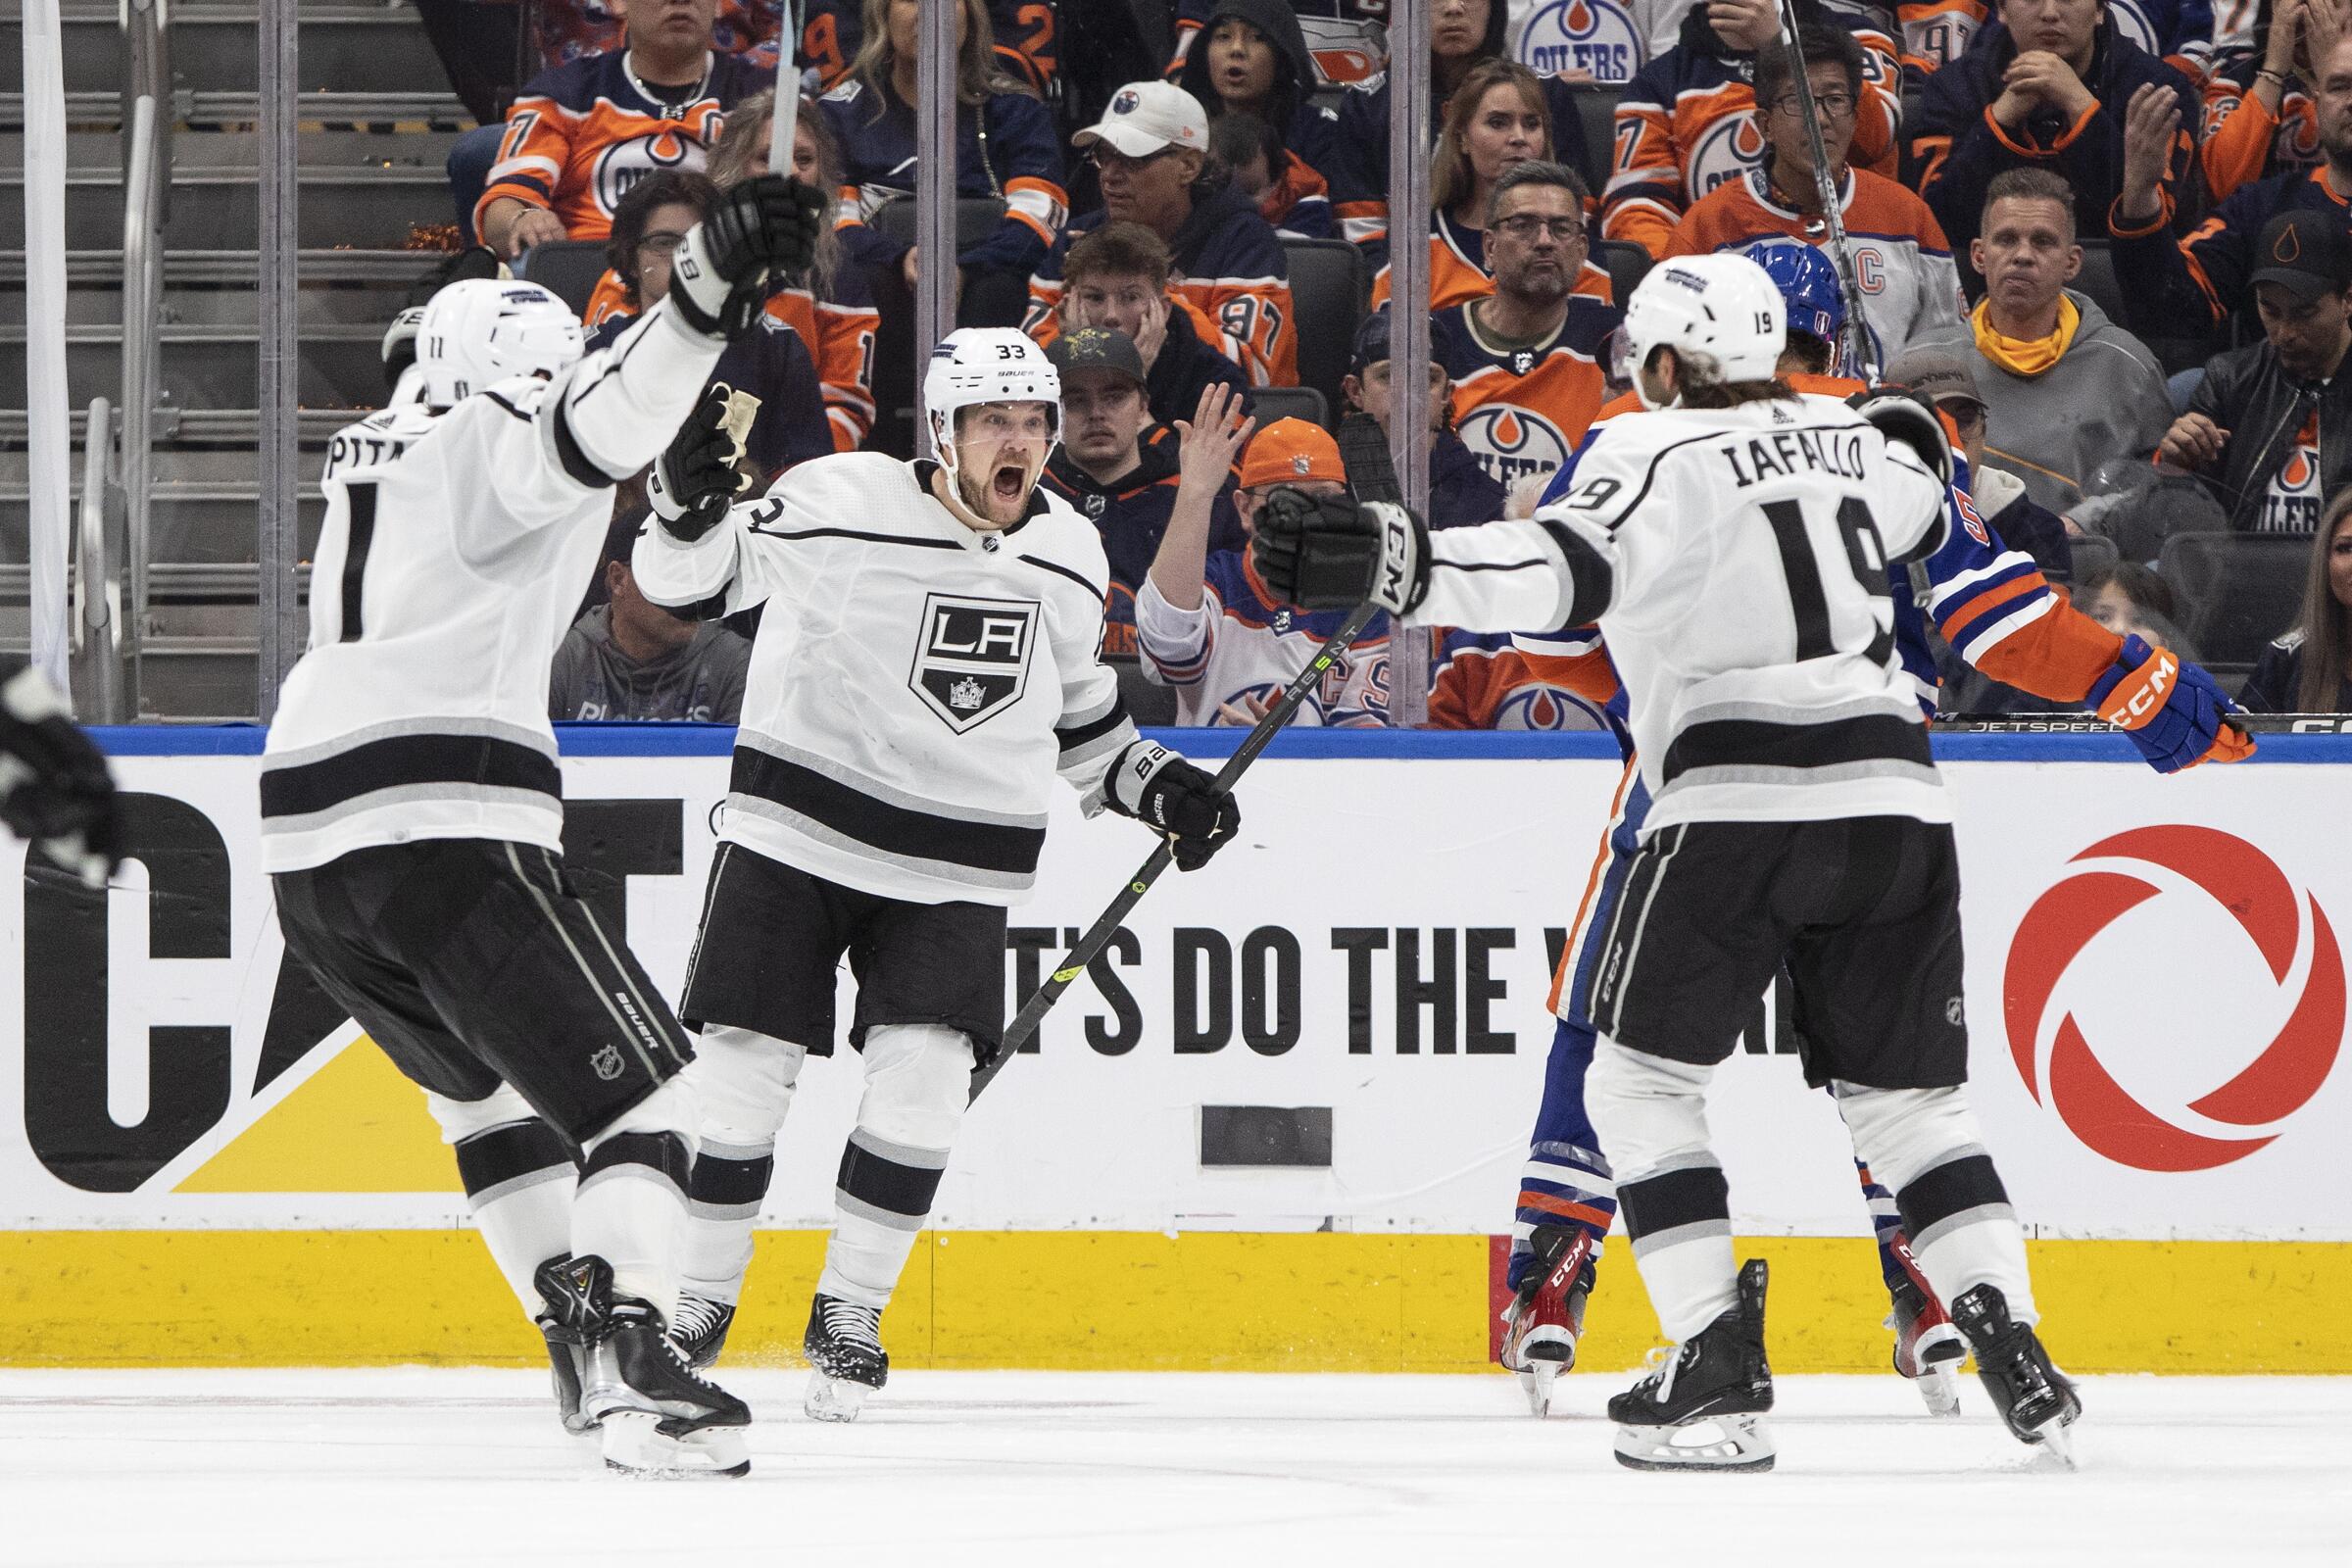 Photos: Edmonton Oilers vs Los Angeles Kings, Game 7 at Rogers Place